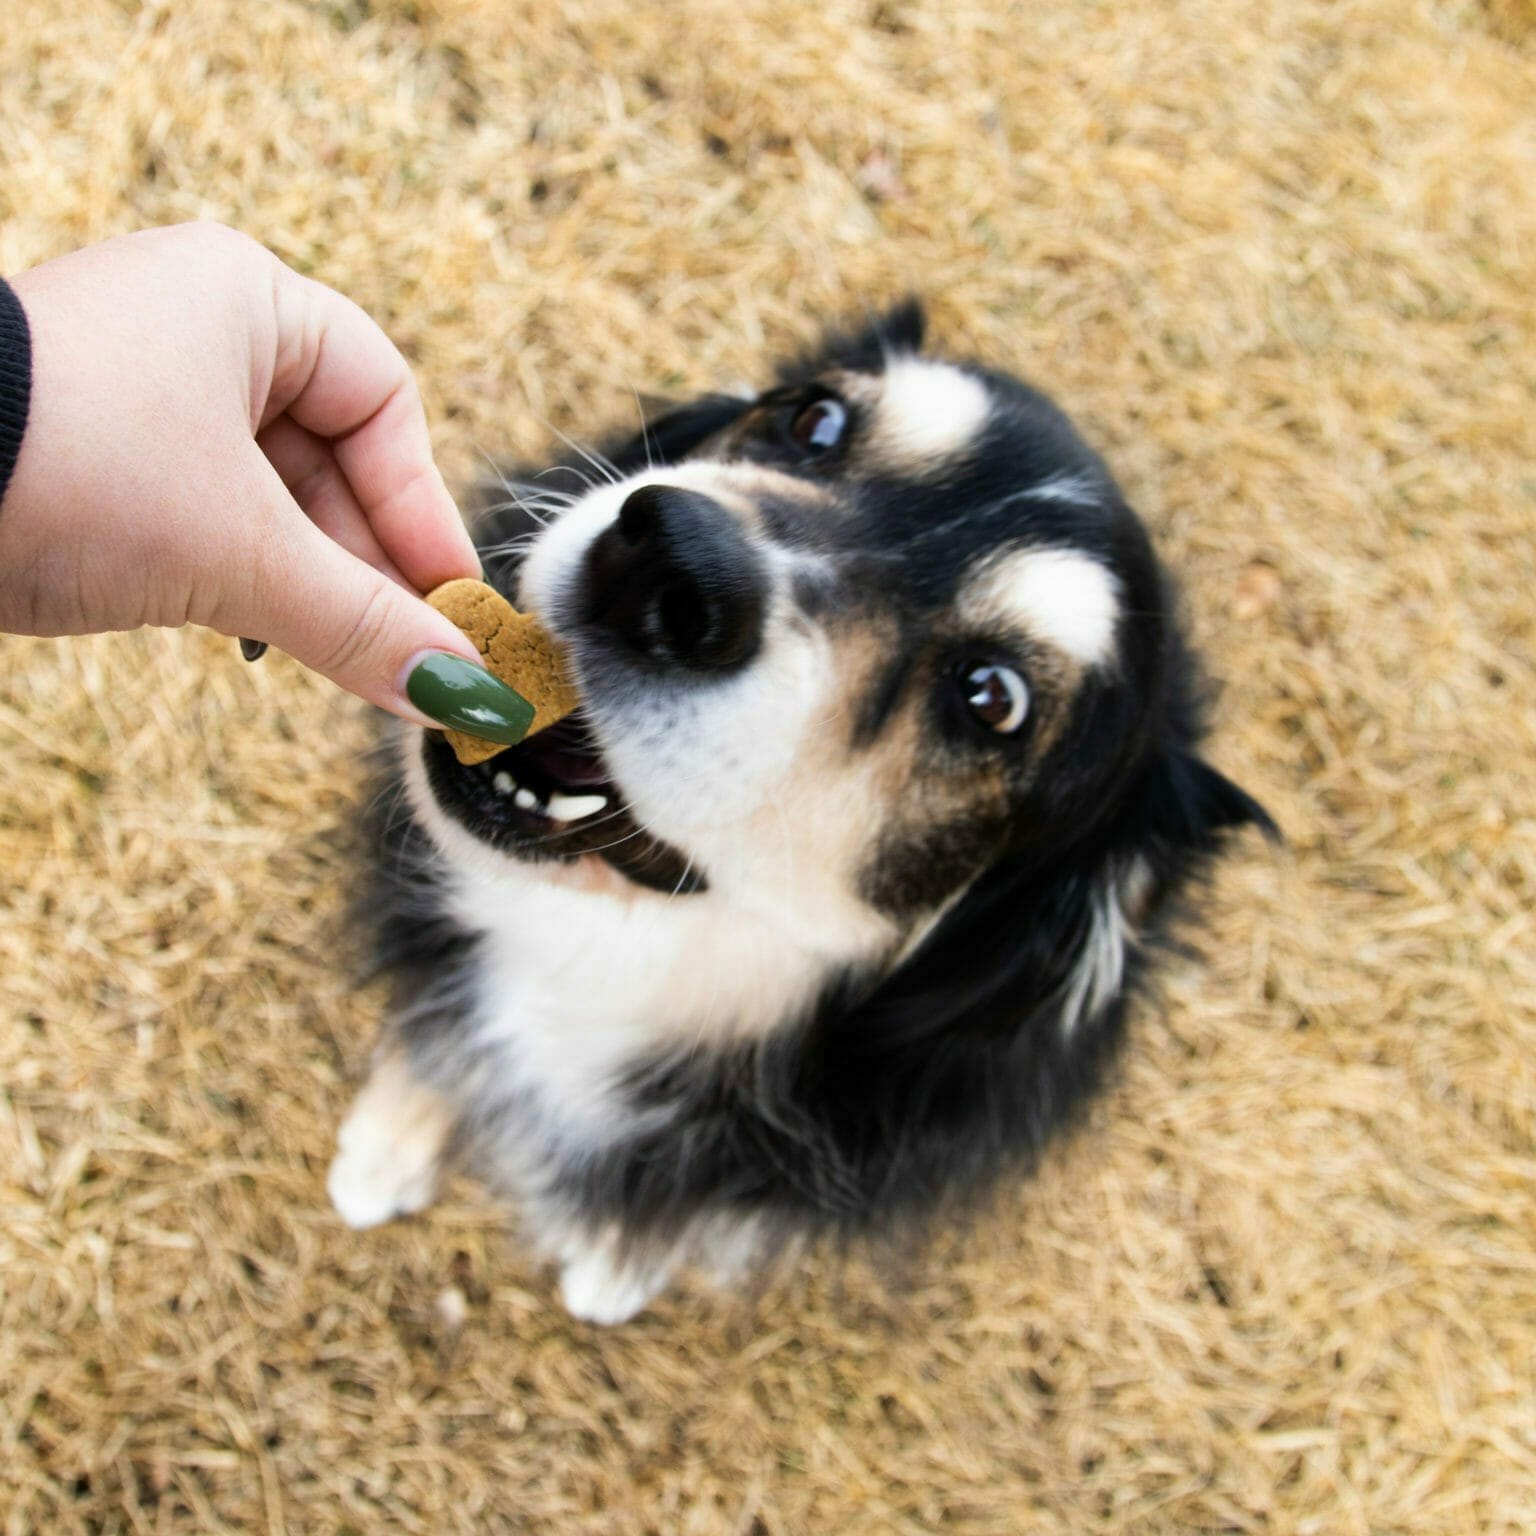 Australian shepard dog biting into an Earth Buddy cbd treats for dogs anxiety. Read this blog to learn about the best gifts for pet holidays.